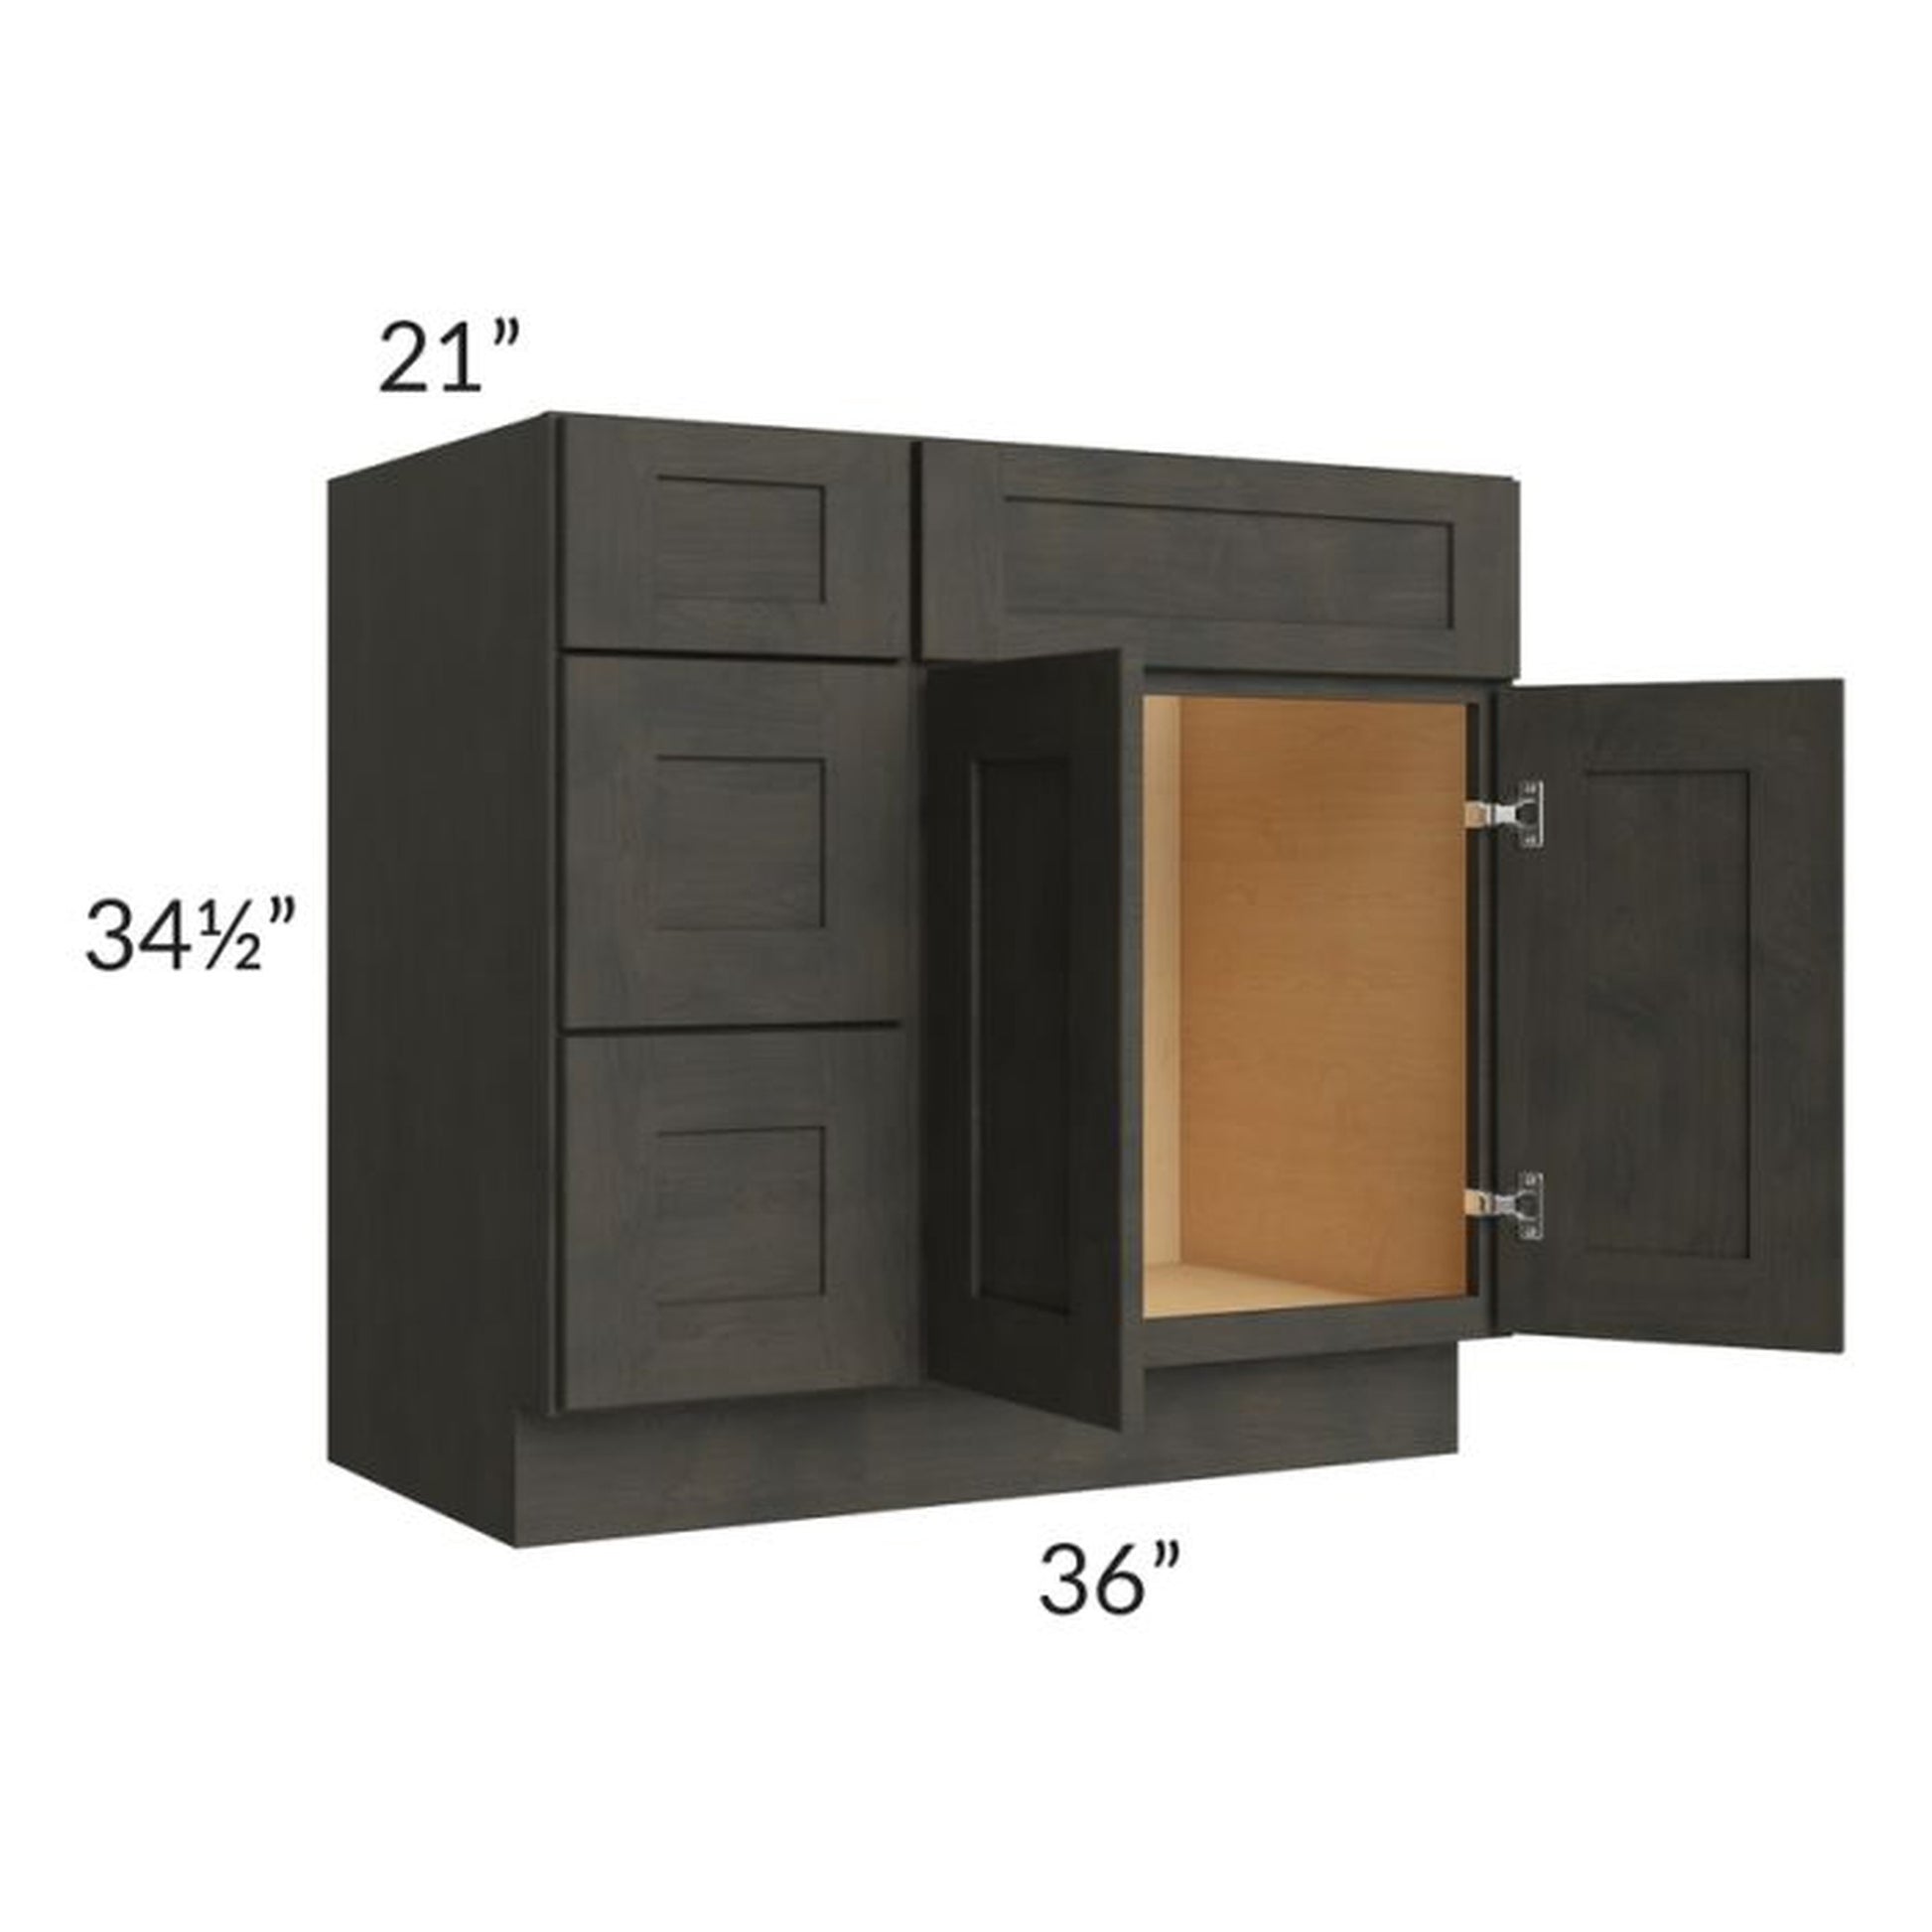 RTA Charcoal Grey Shaker 36" Vanity Base Cabinet (Drawers on Left) with 2 Decorative End Panels